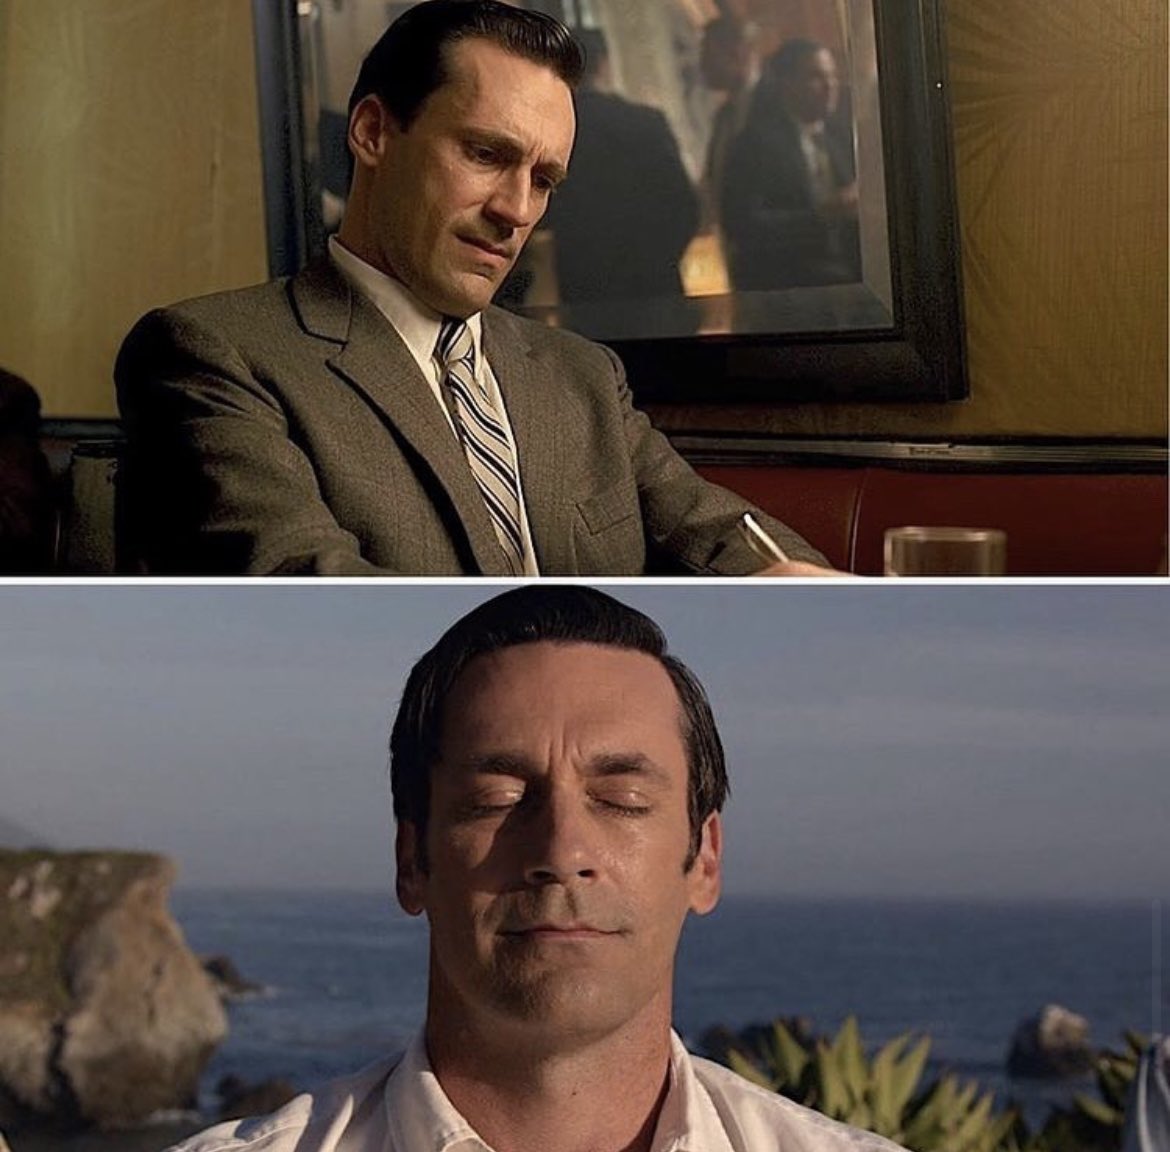 First and last time we see Don Draper in Mad Men, he’s thinking of ads.